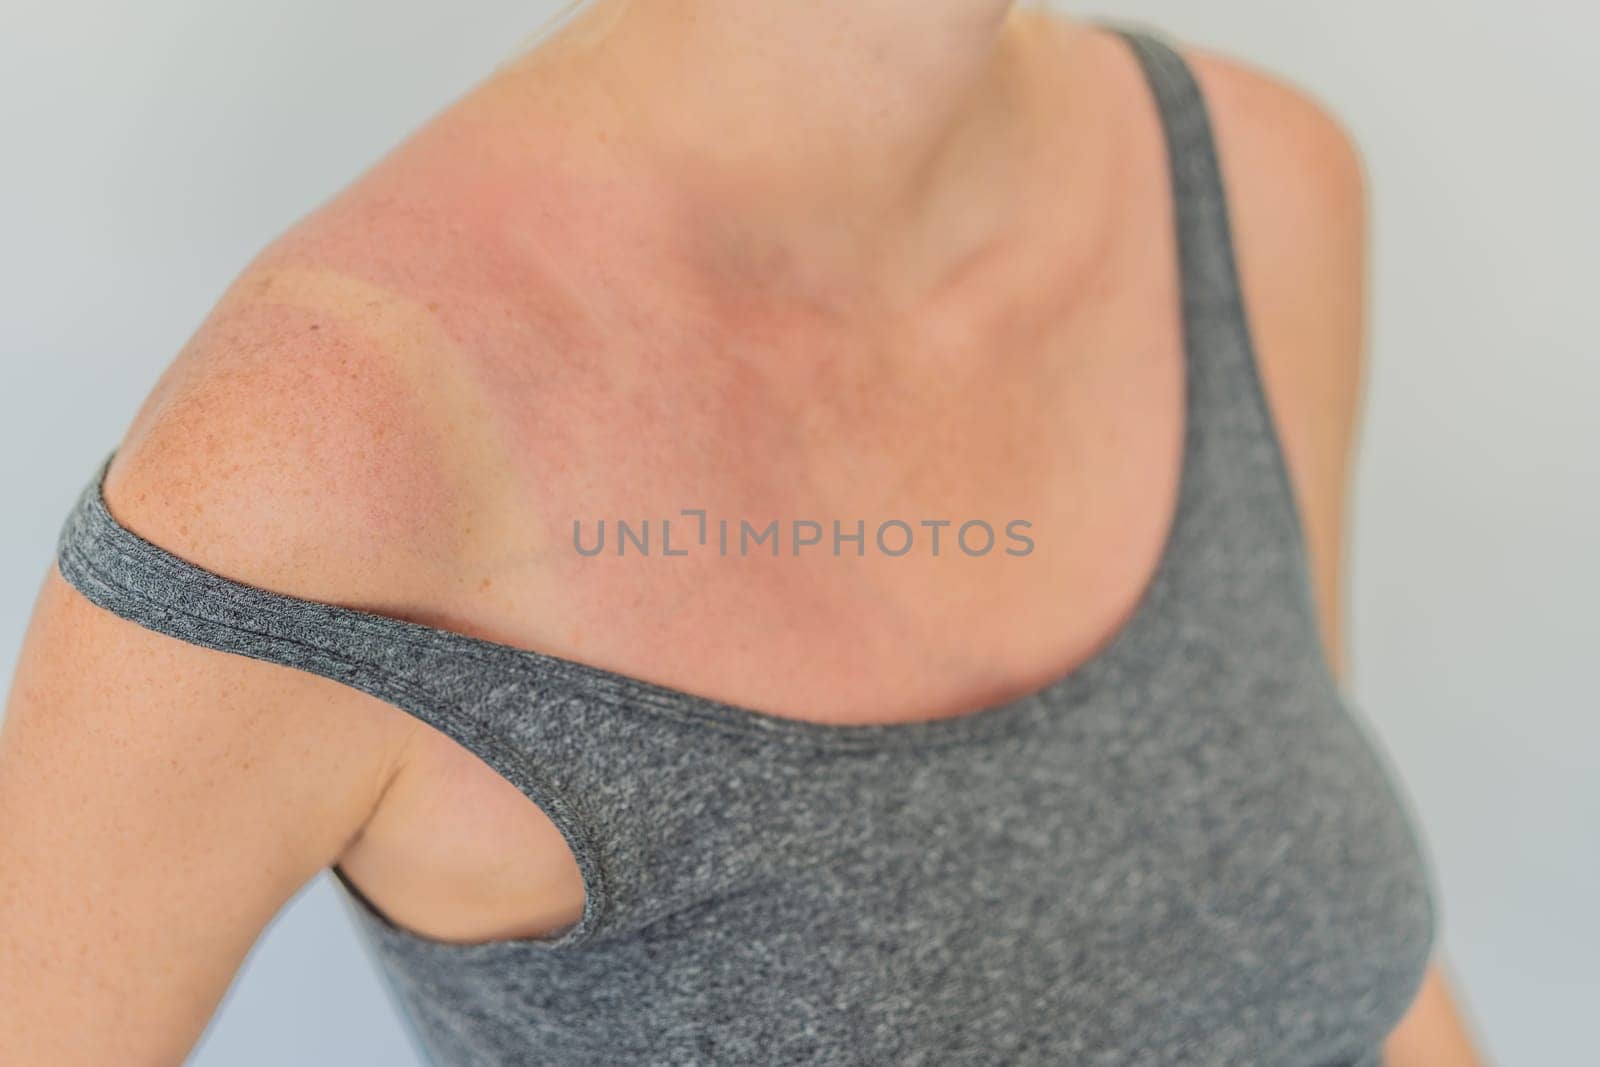 Expectant woman with sunburned, red skin, highlighting the importance of sun protection during pregnancy.